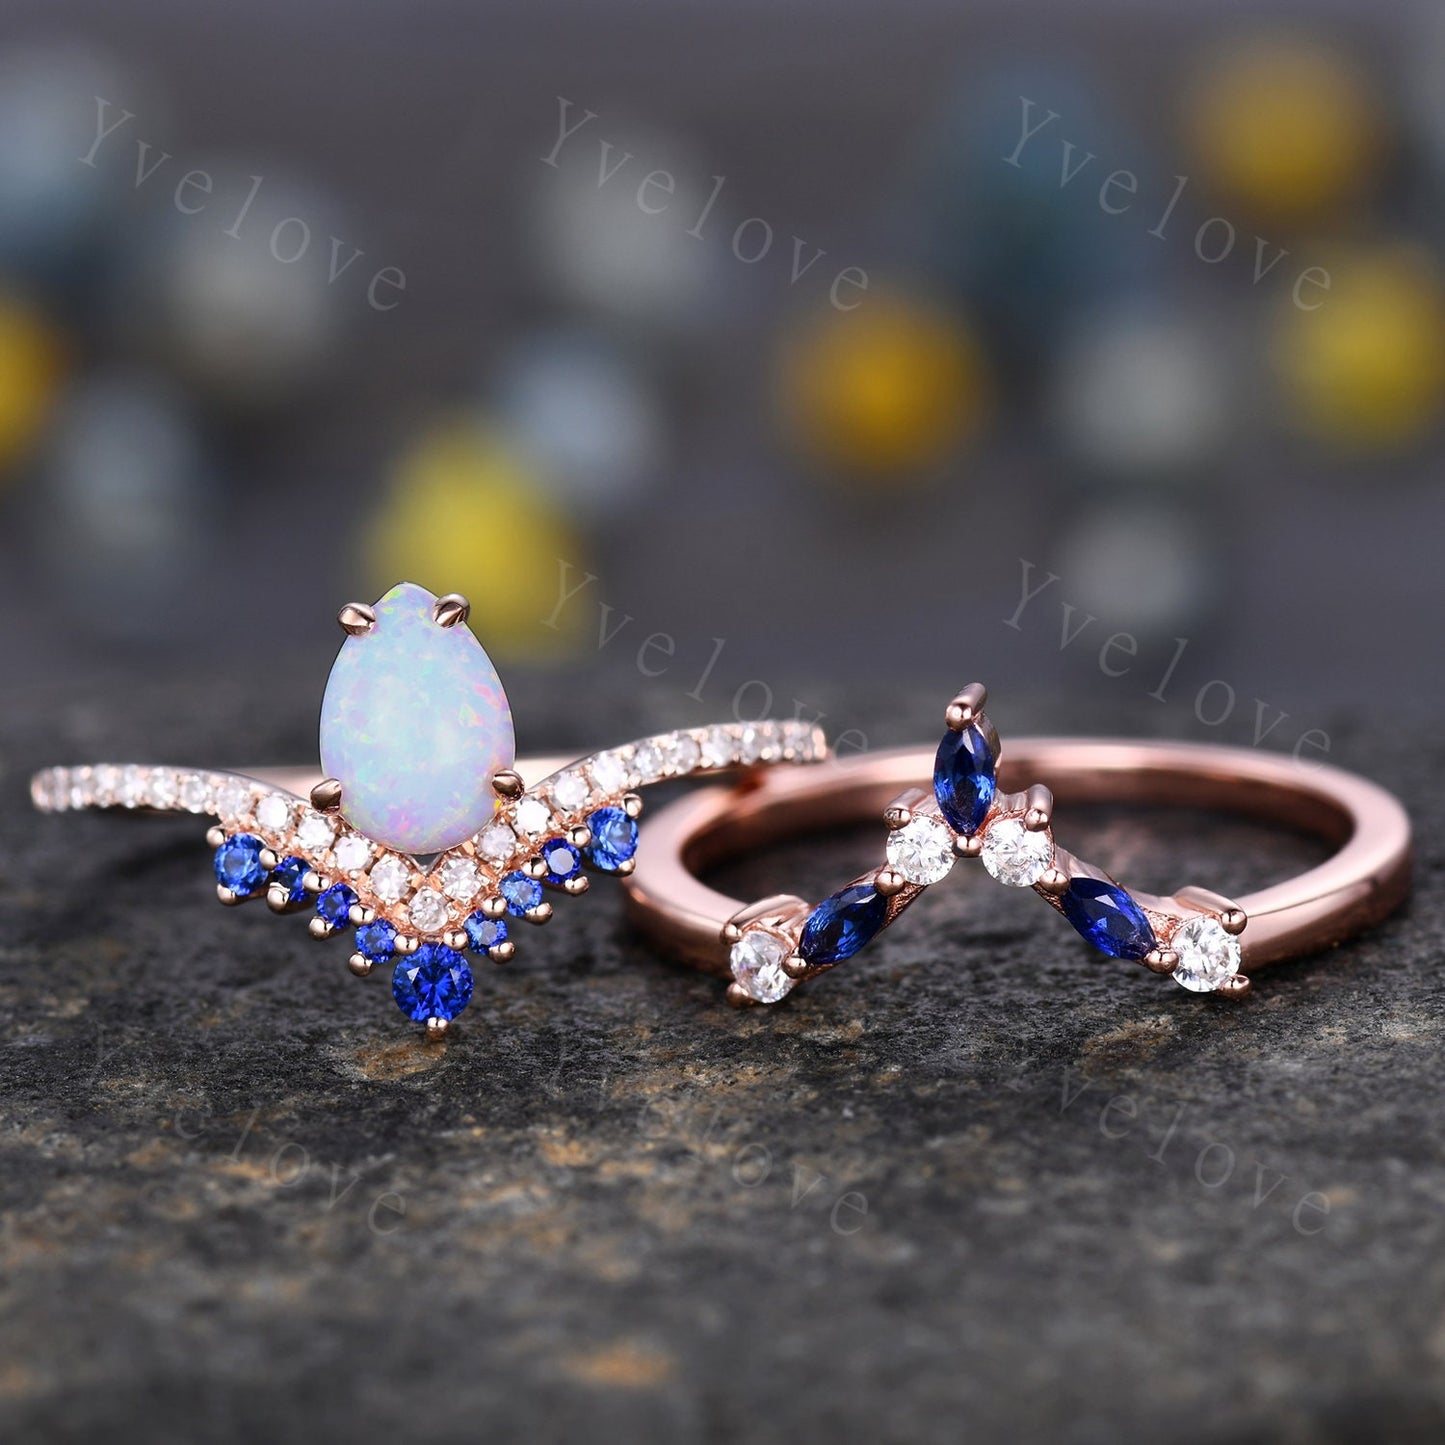 Vintage White Opal Engagement Ring,Opal Sapphire Bridal Ring Set,Pear Opal Ring,Curve Blue Sapphire Diamond Stacking Band,14k Rose Gold Ring